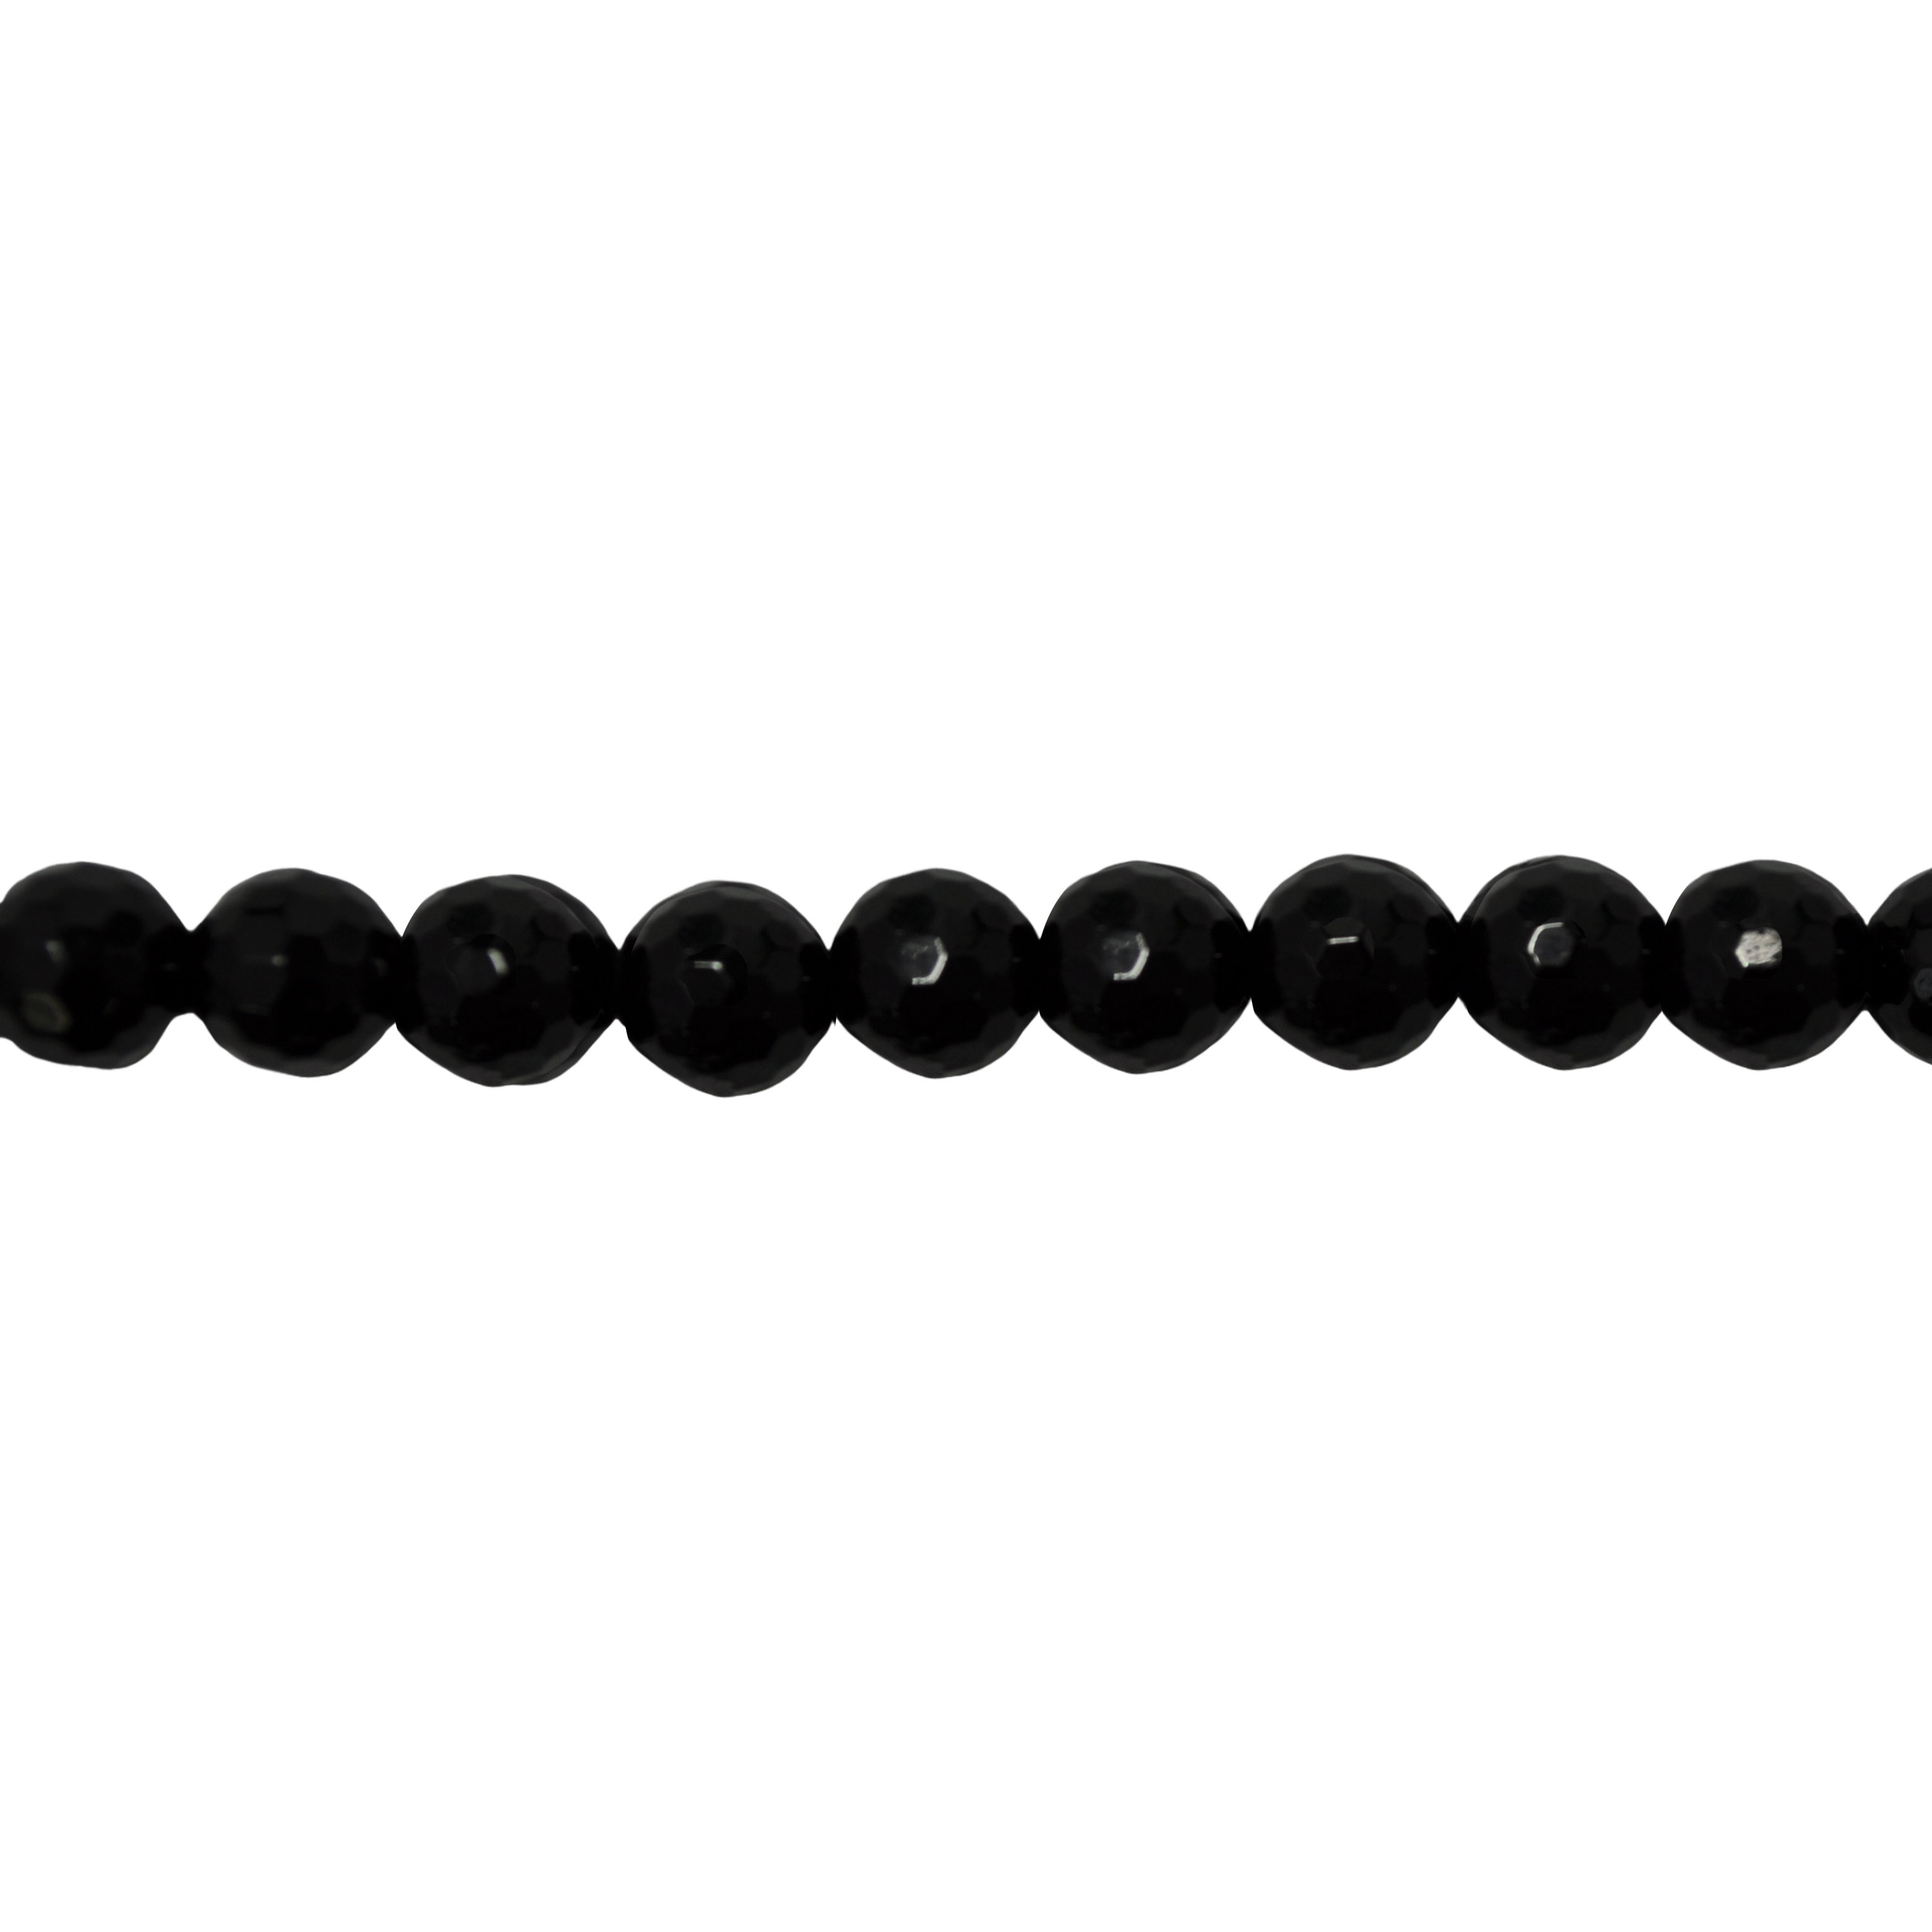 8mm Black Tourmaline - Faceted